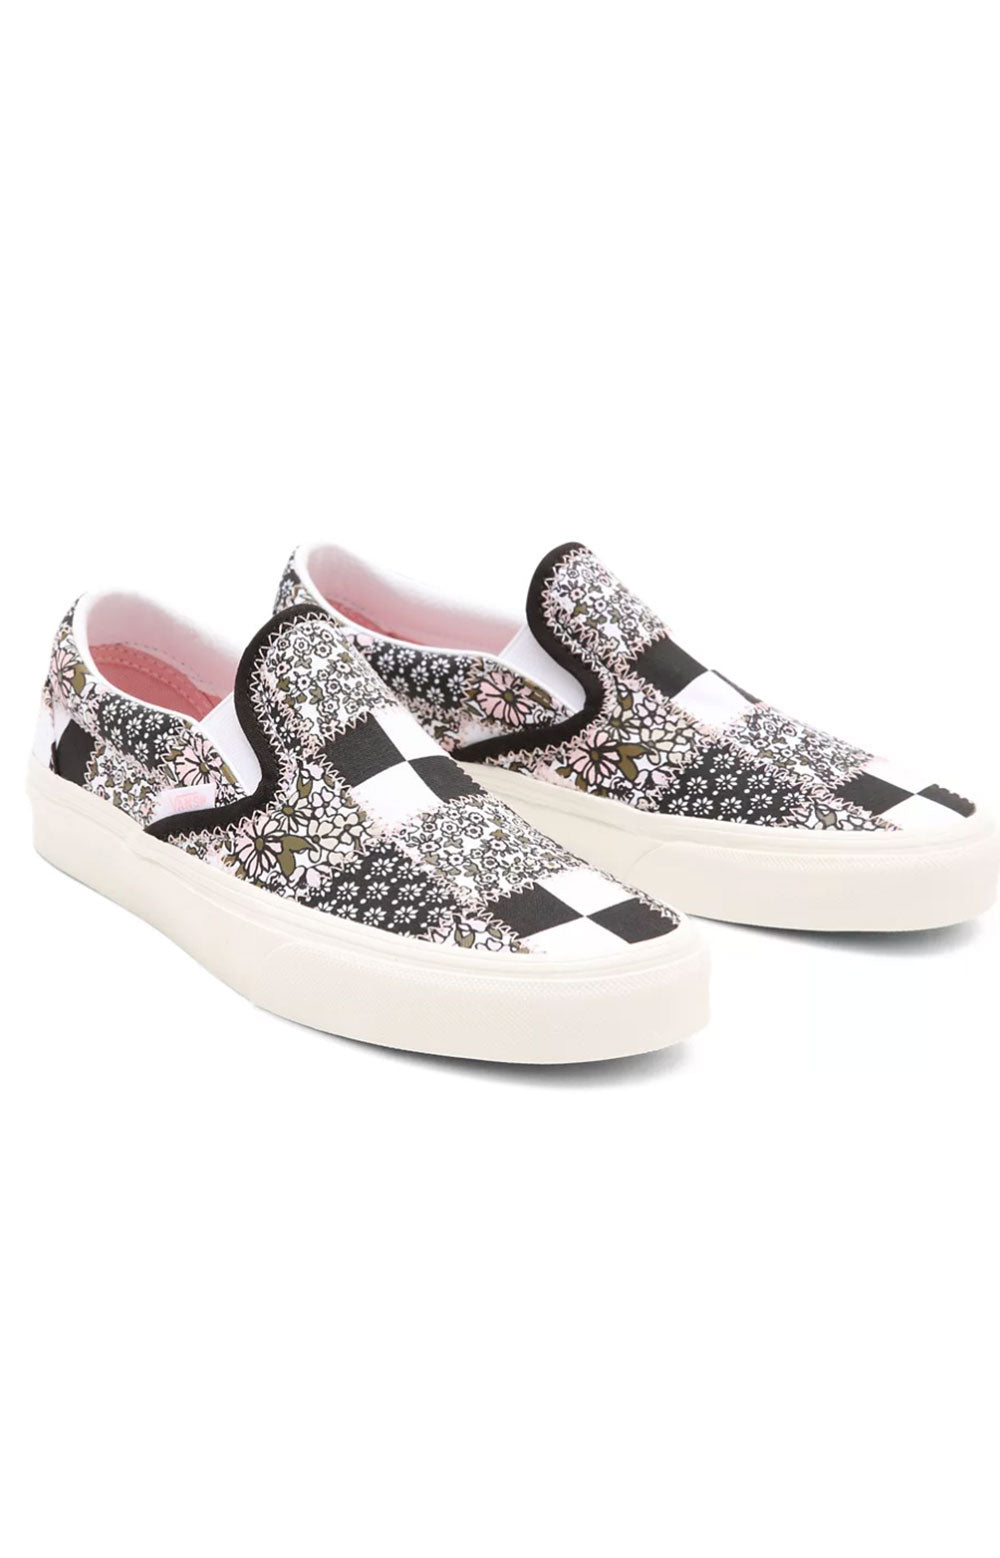 (3TB9FY) Patchwork Floral Classic Slip-On Shoes - Multi/Marshmallow